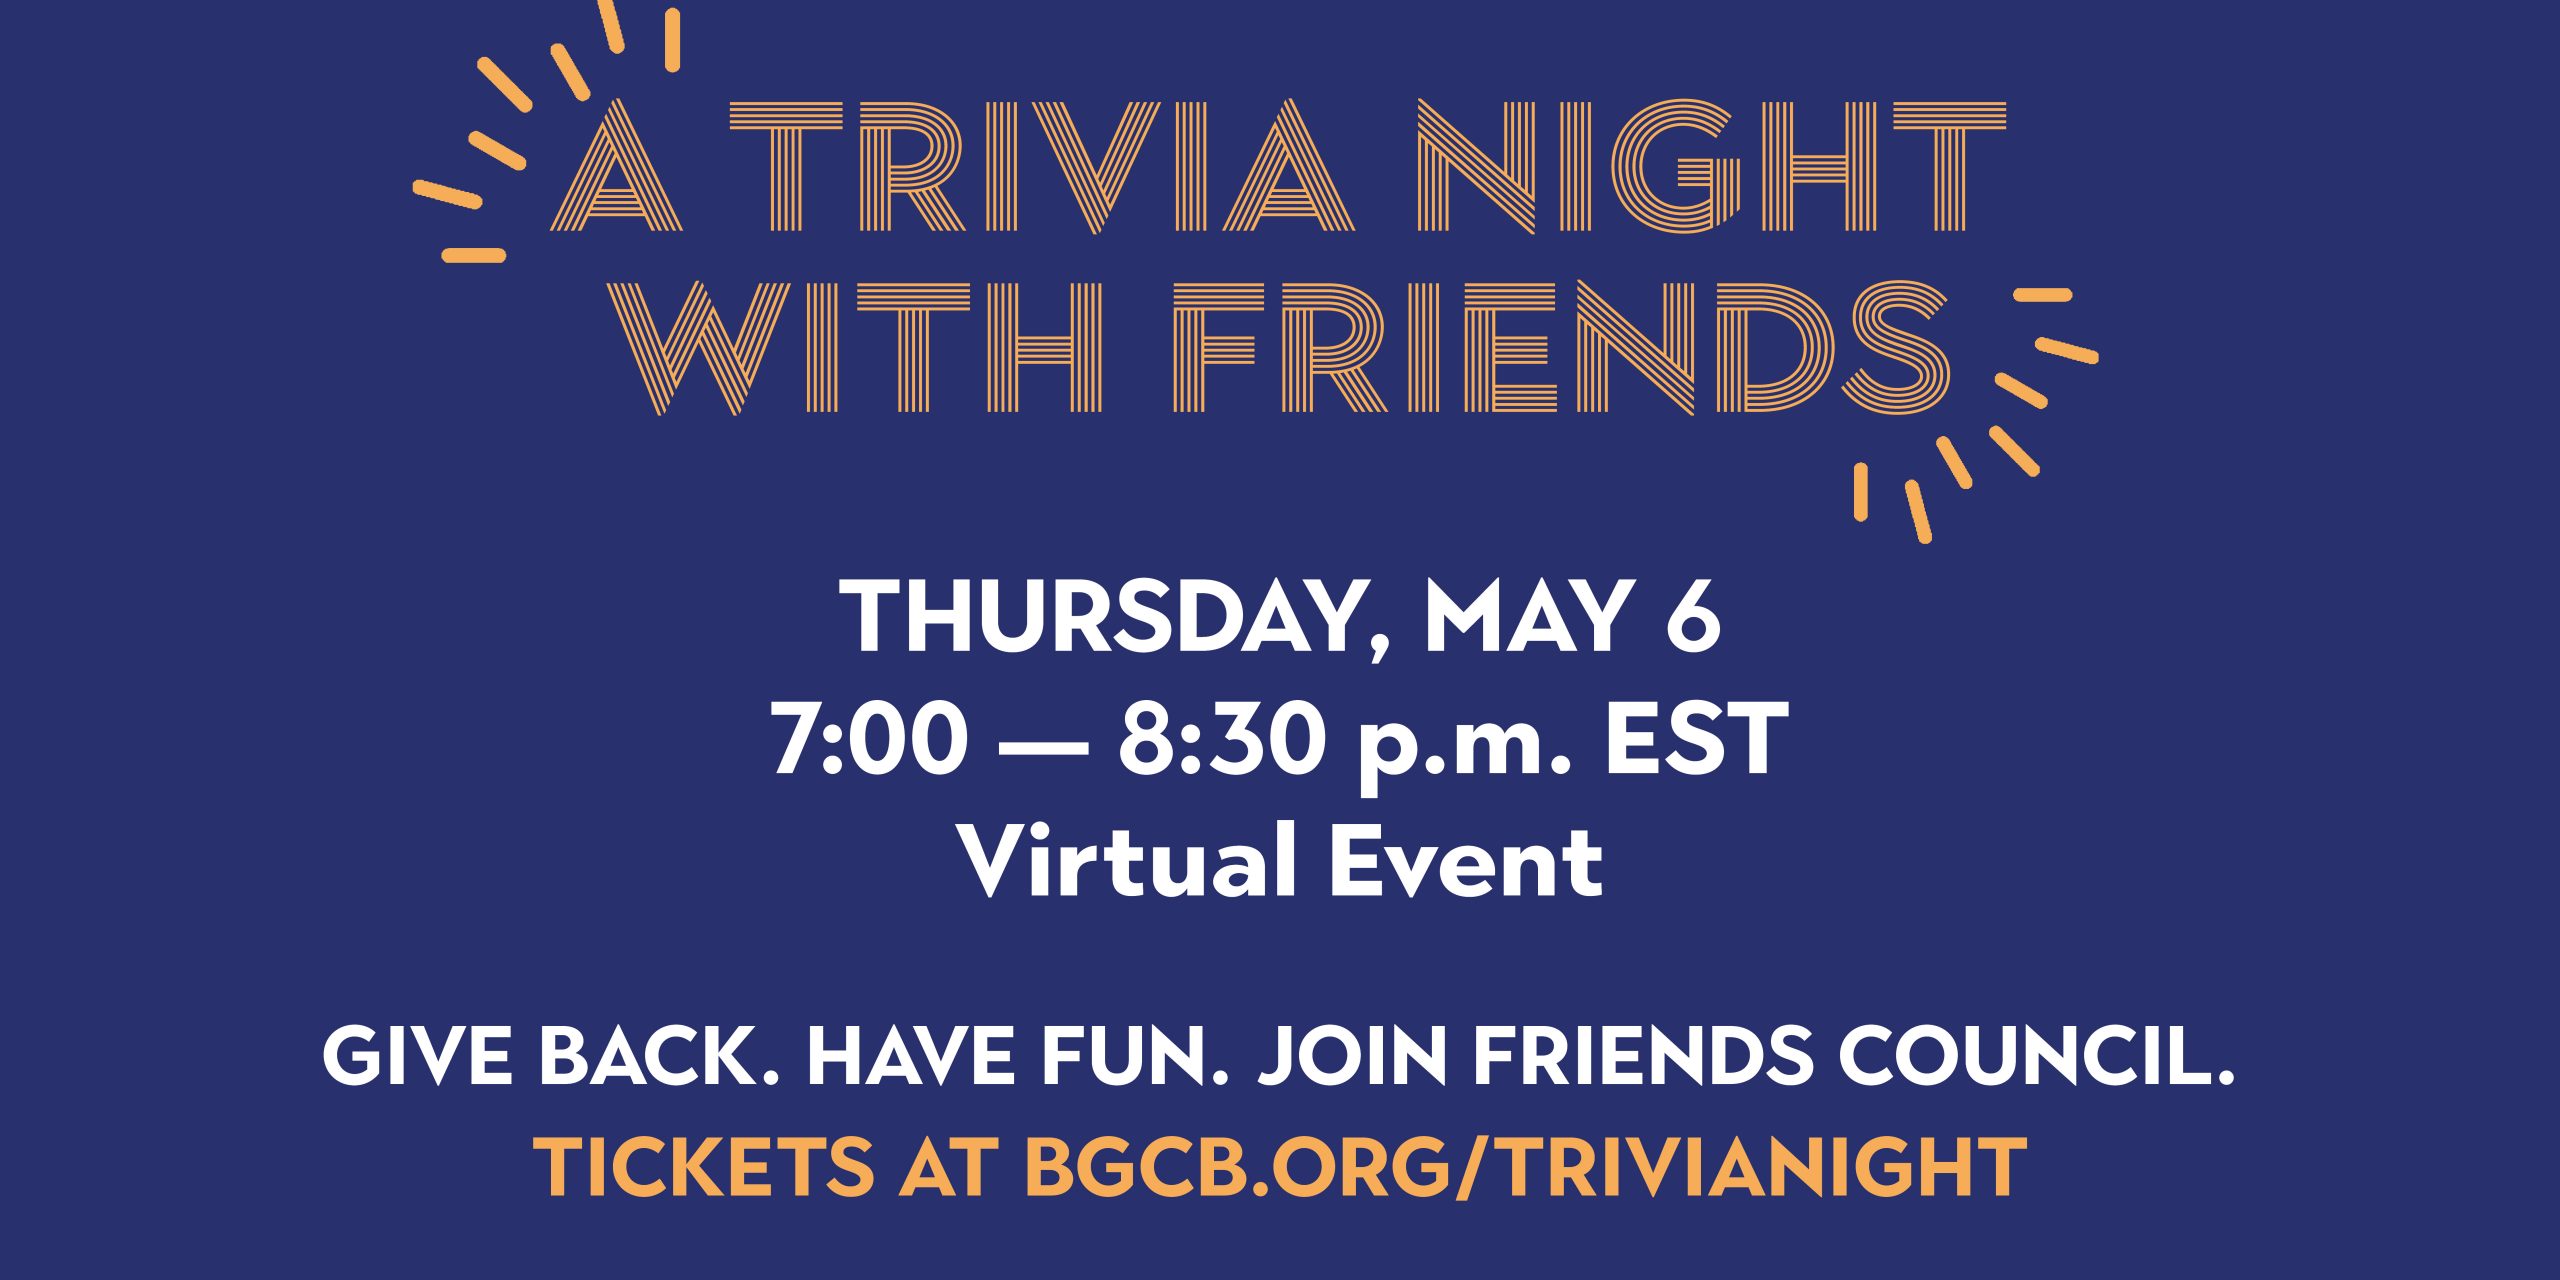 Sponsor a Trivia Night With Friends